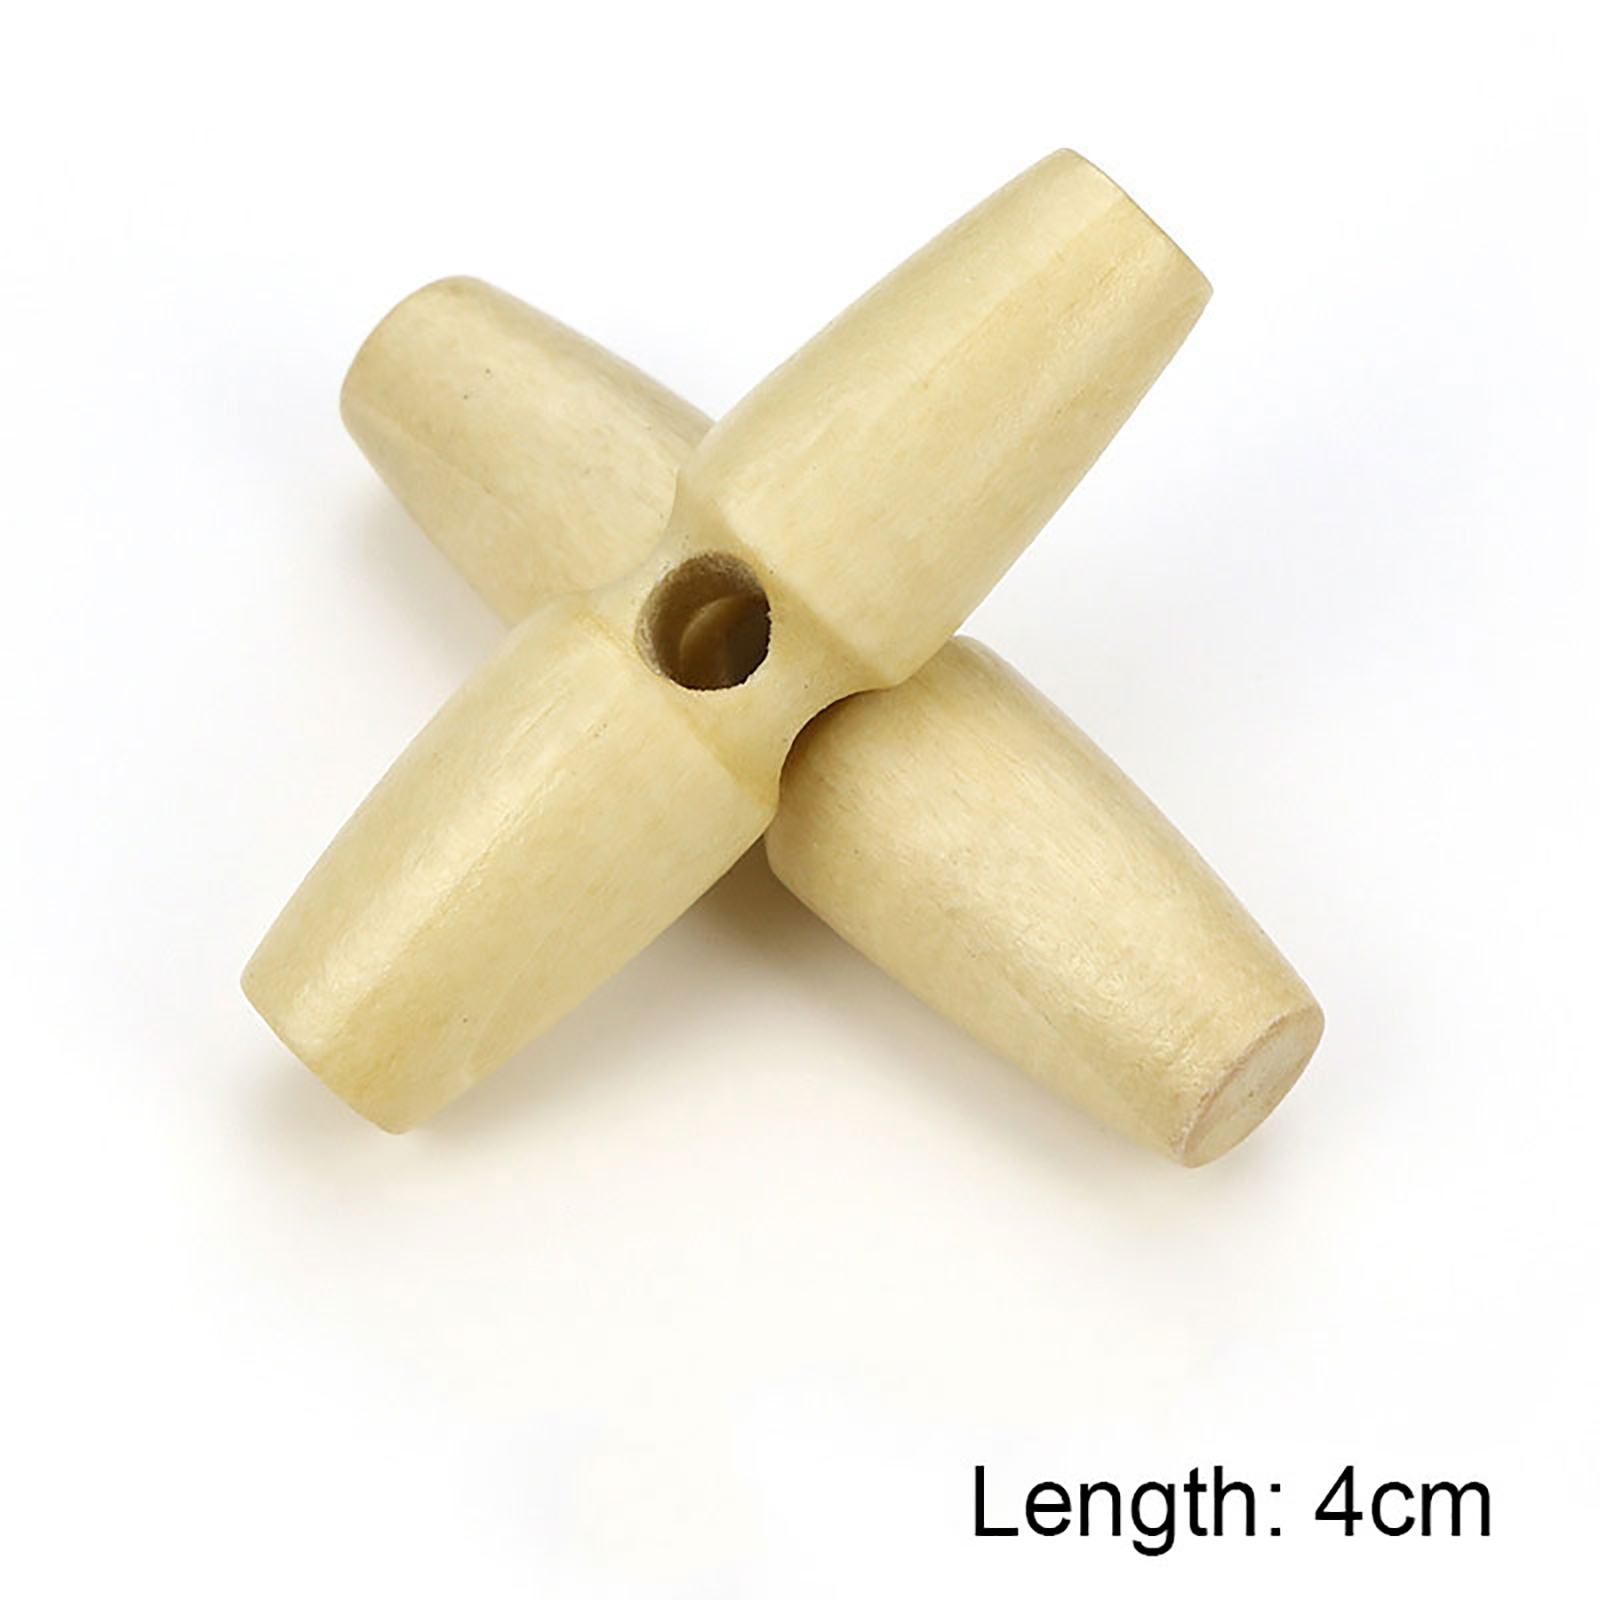 Picture of Wood Horn Buttons Scrapbooking Single Hole Barrel Natural 40mm, 20 PCs